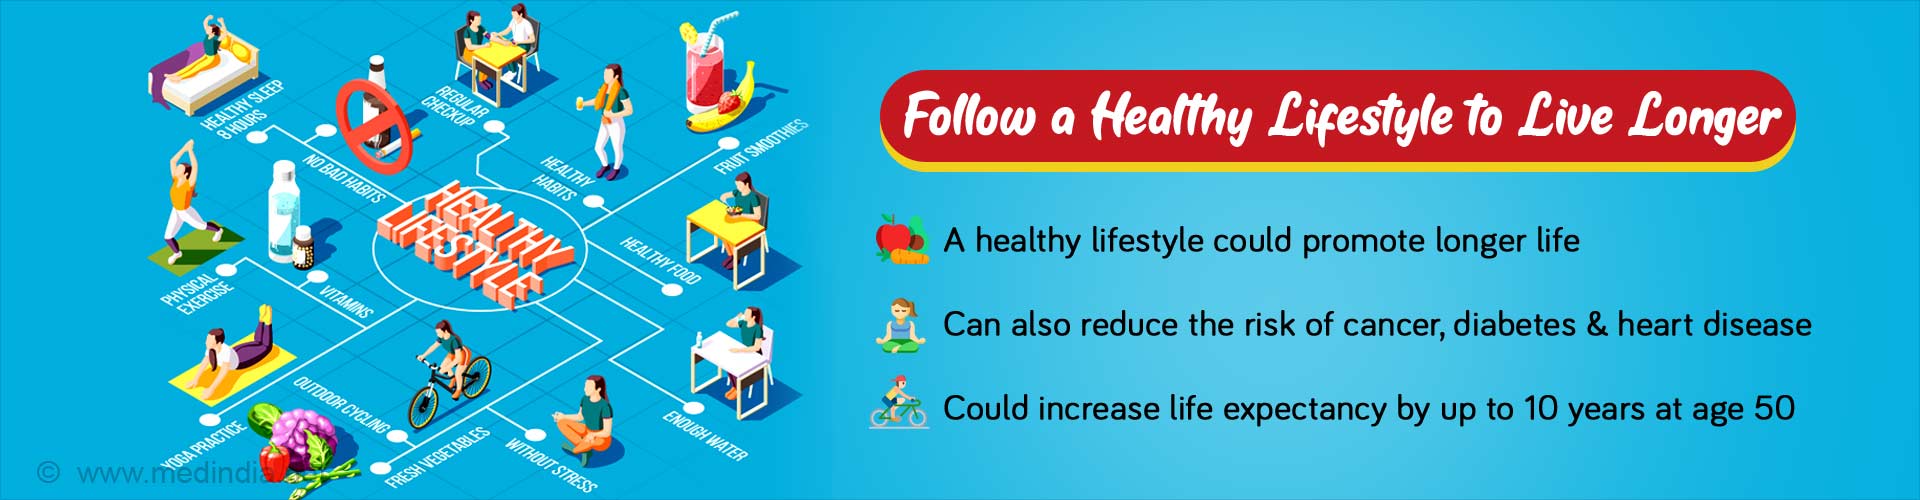 Follow a healthy lifestyle to live longer. A healthy lifestyle could promote longer life. Can also reduce the risk of cancer, diabetes and heart disease. Could increase life expectancy by up to 10 years at age 50.